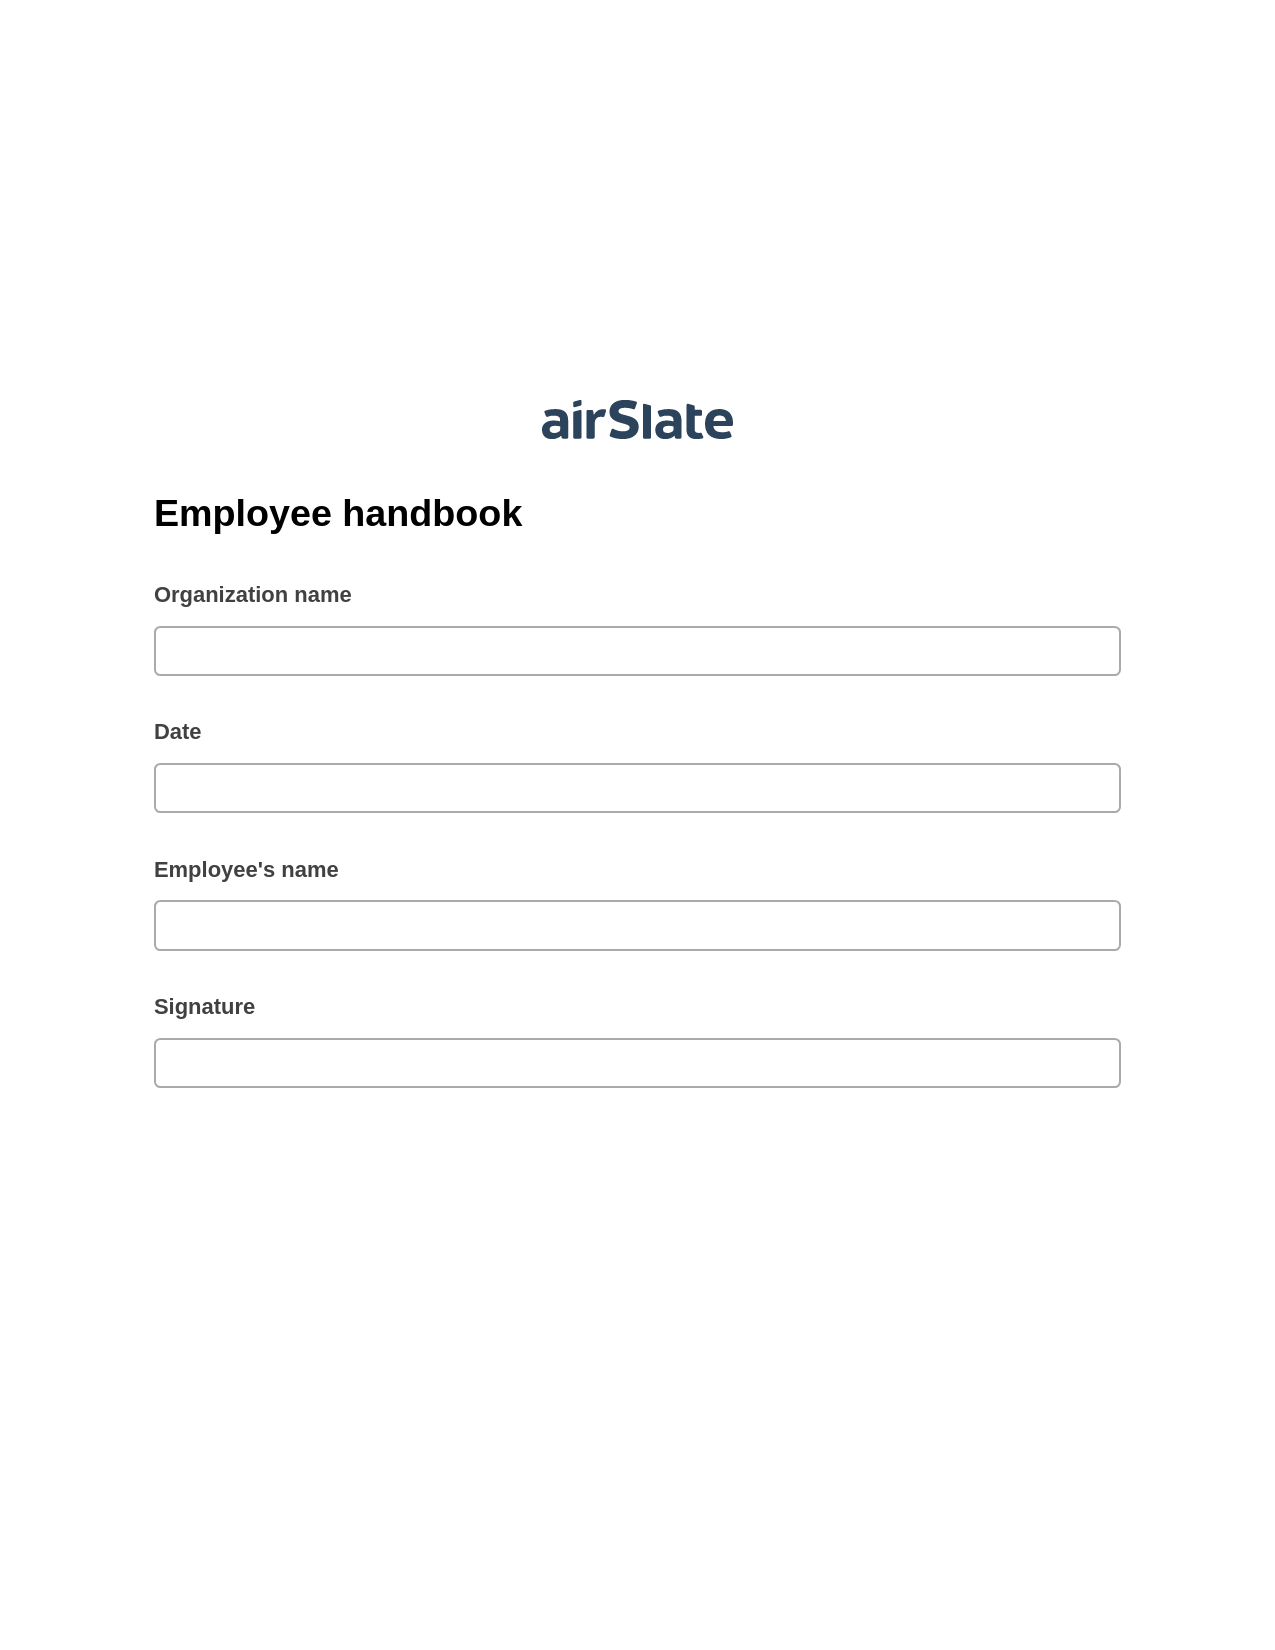 Employee handbook Pre-fill from Excel Spreadsheet Bot, Add Tags to Slate Bot, Text Message Notification Postfinish Bot